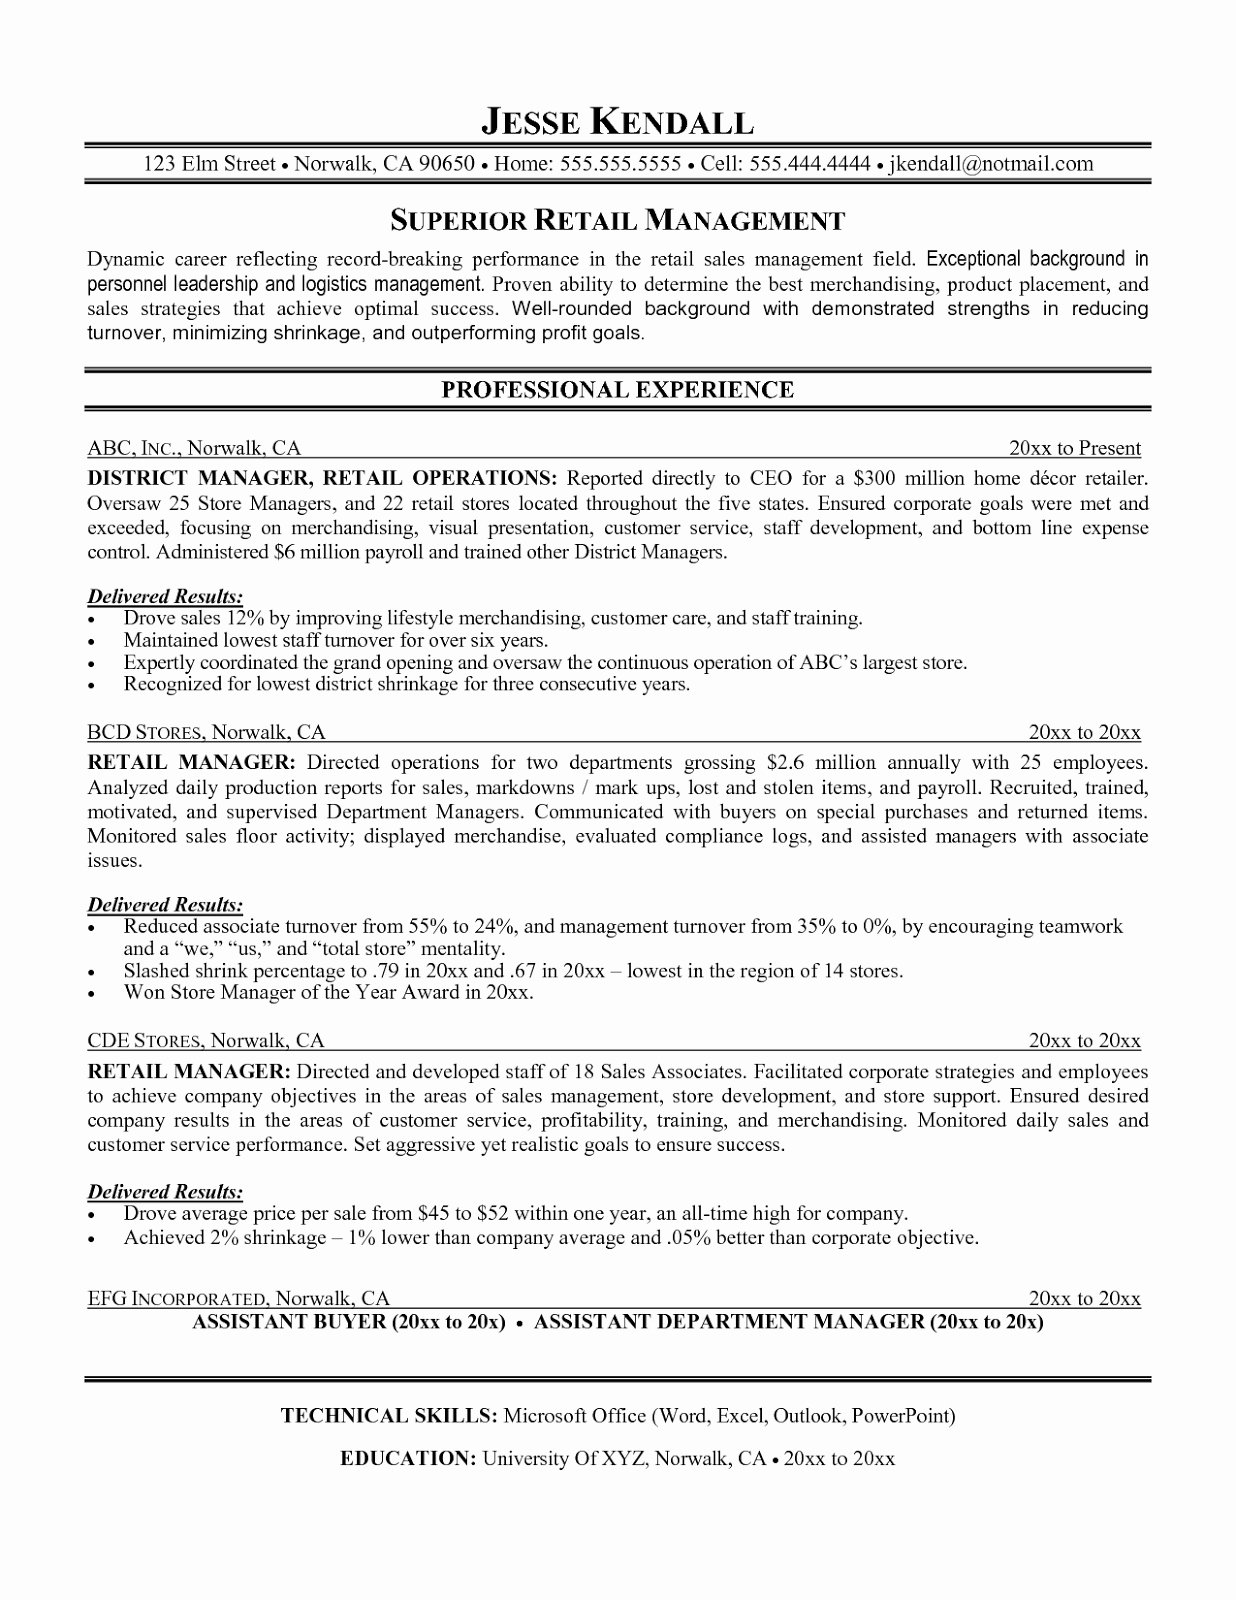 Sample Resume For Retail Manager Position